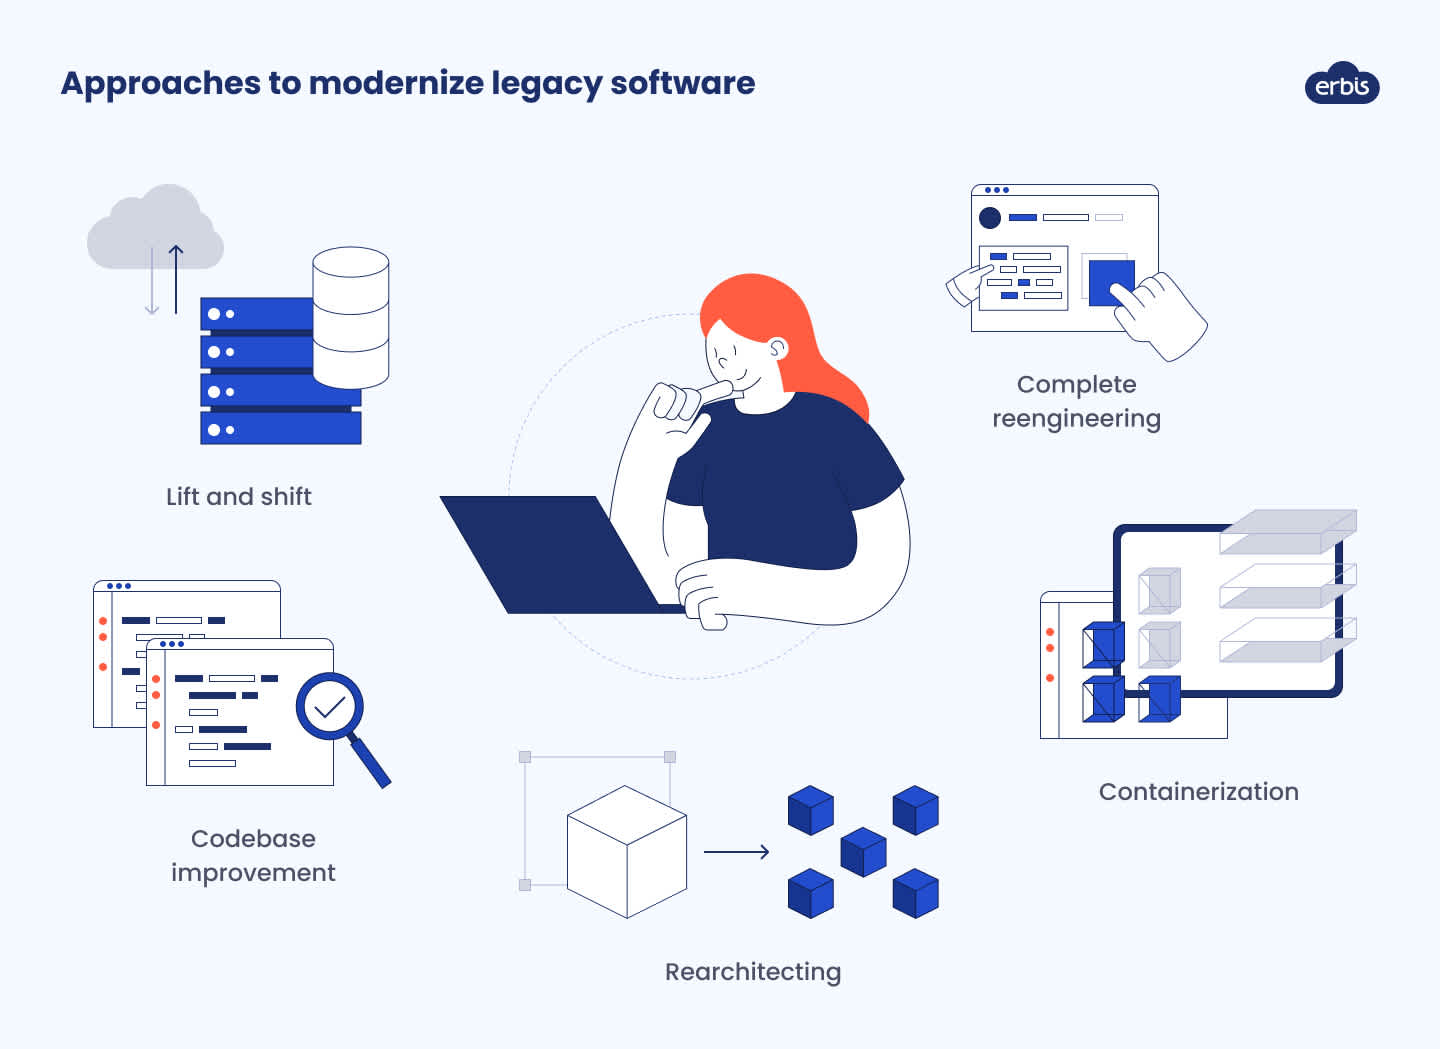 How to modernize legacy software